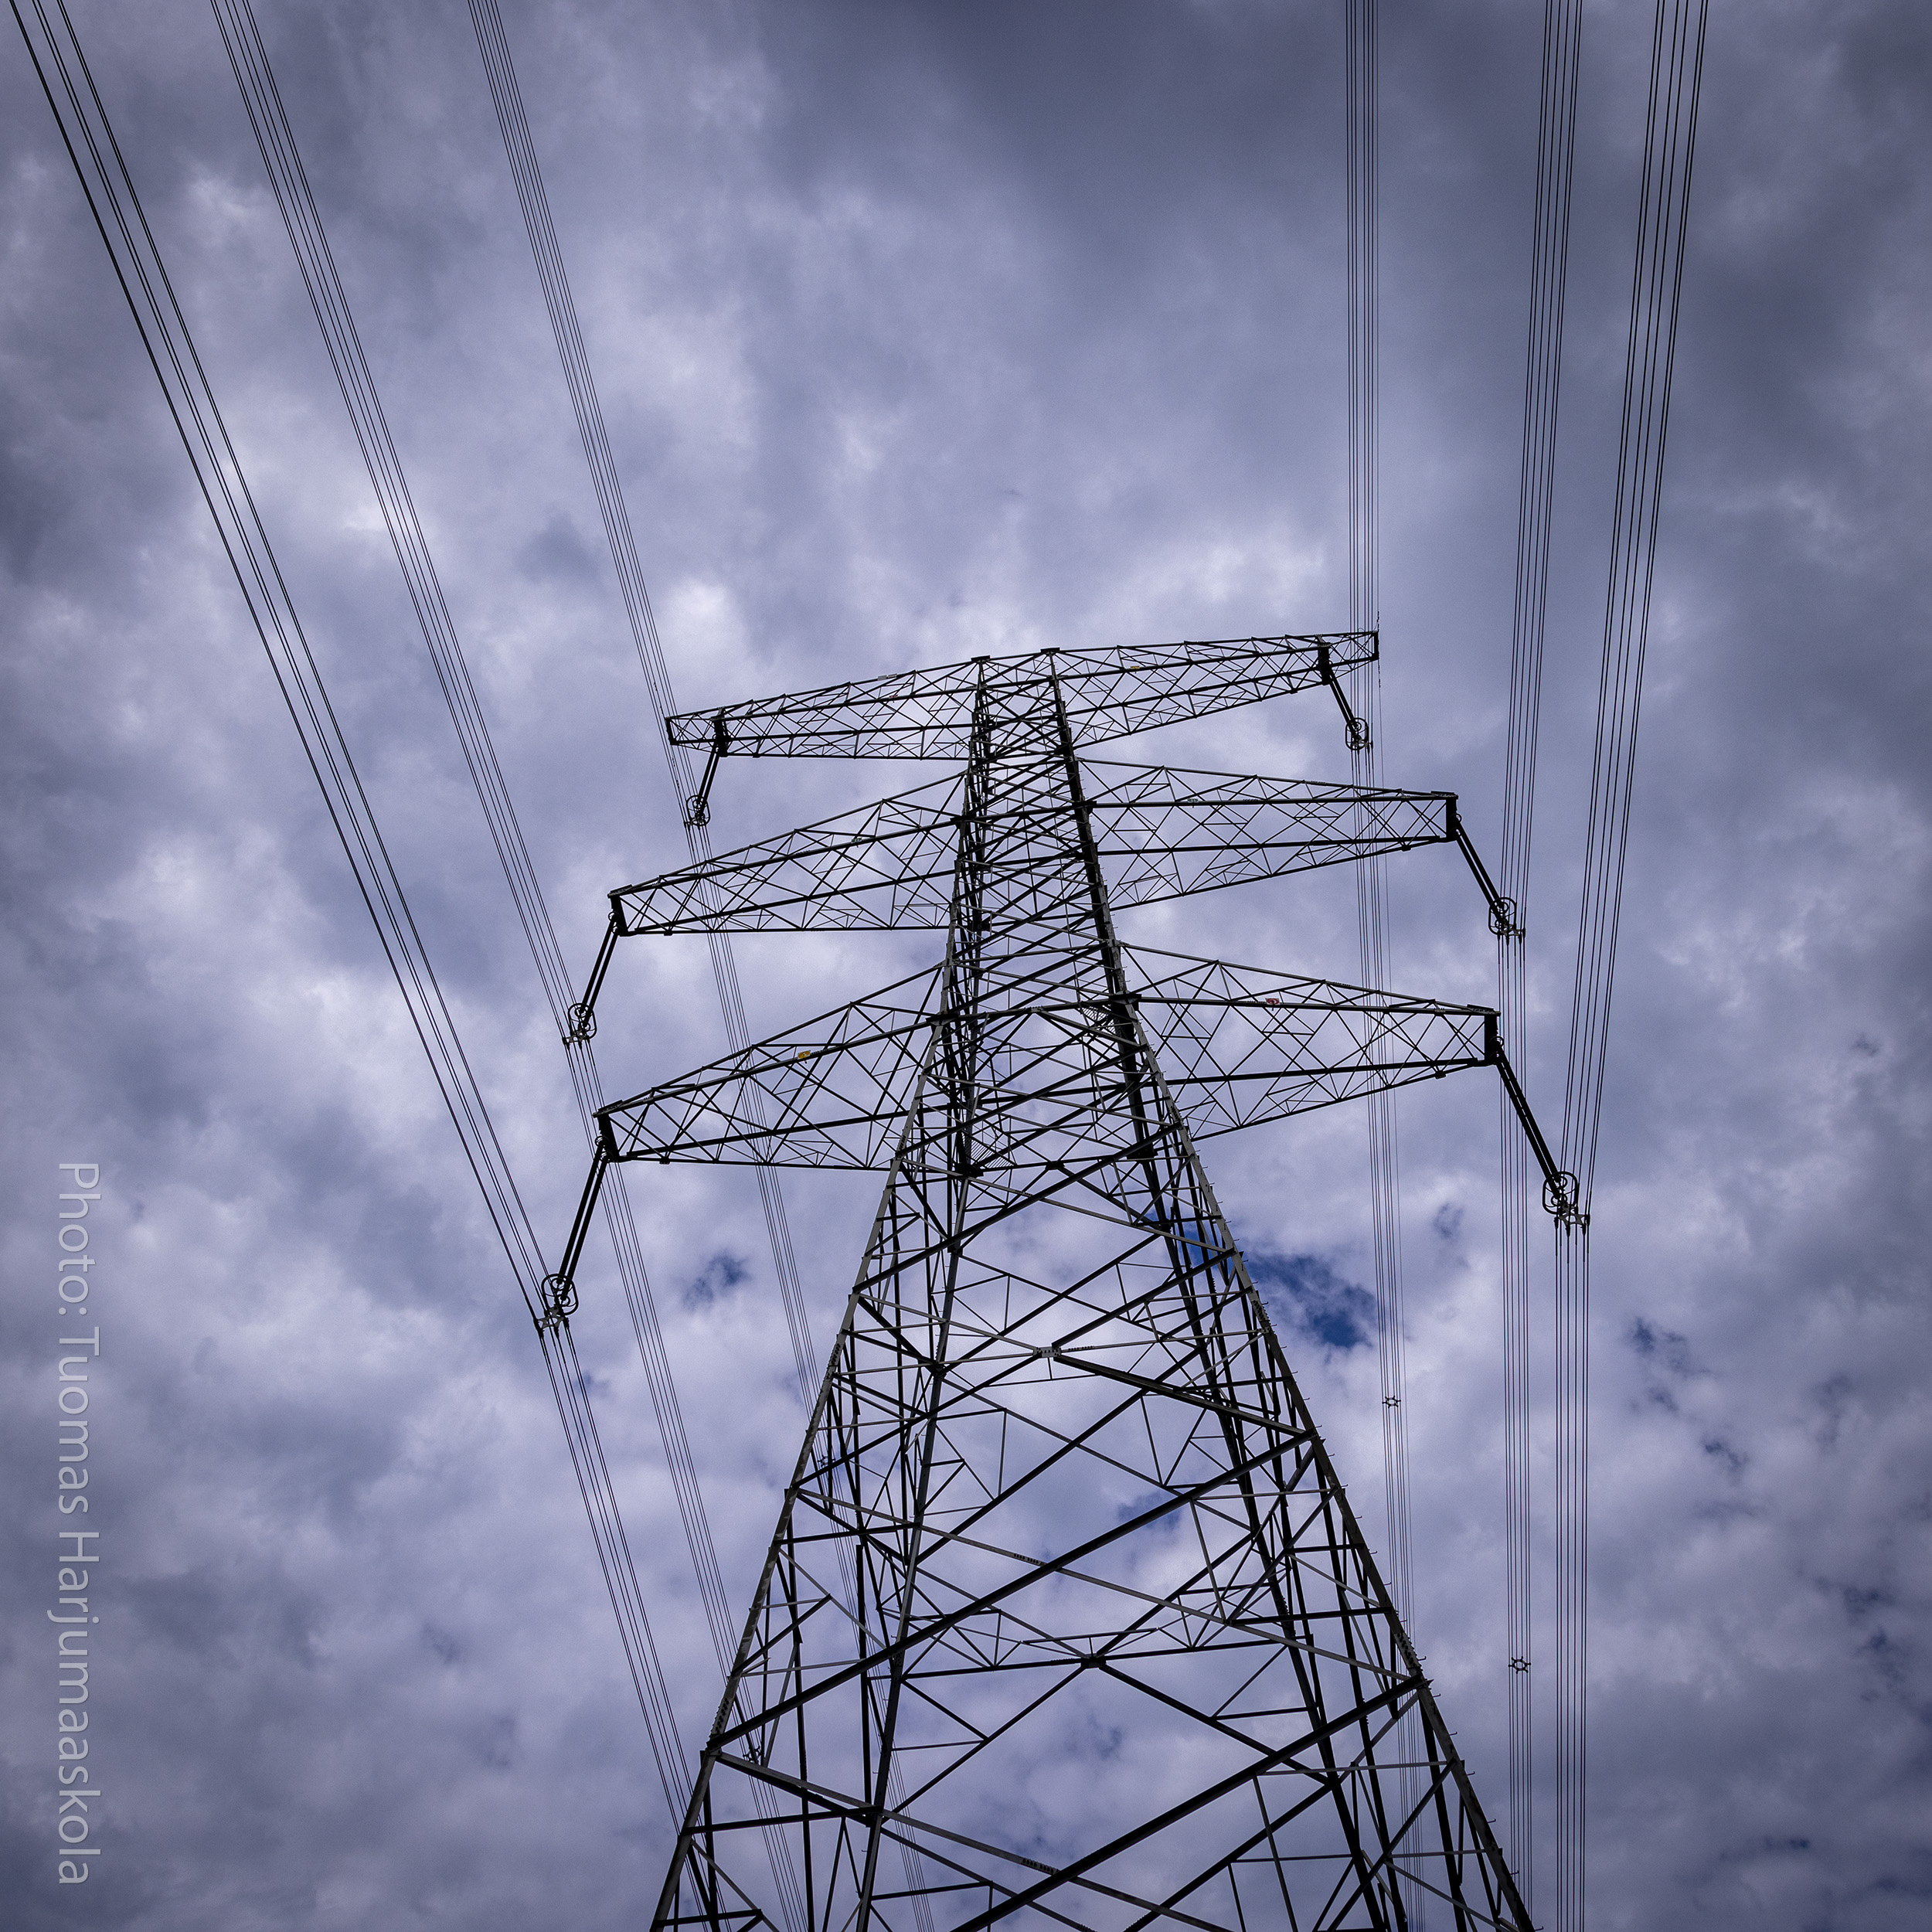 A transmission tower photographed from underneath, heavy clouds hanging above. Photographer by Tuomas Harjumaaskola.